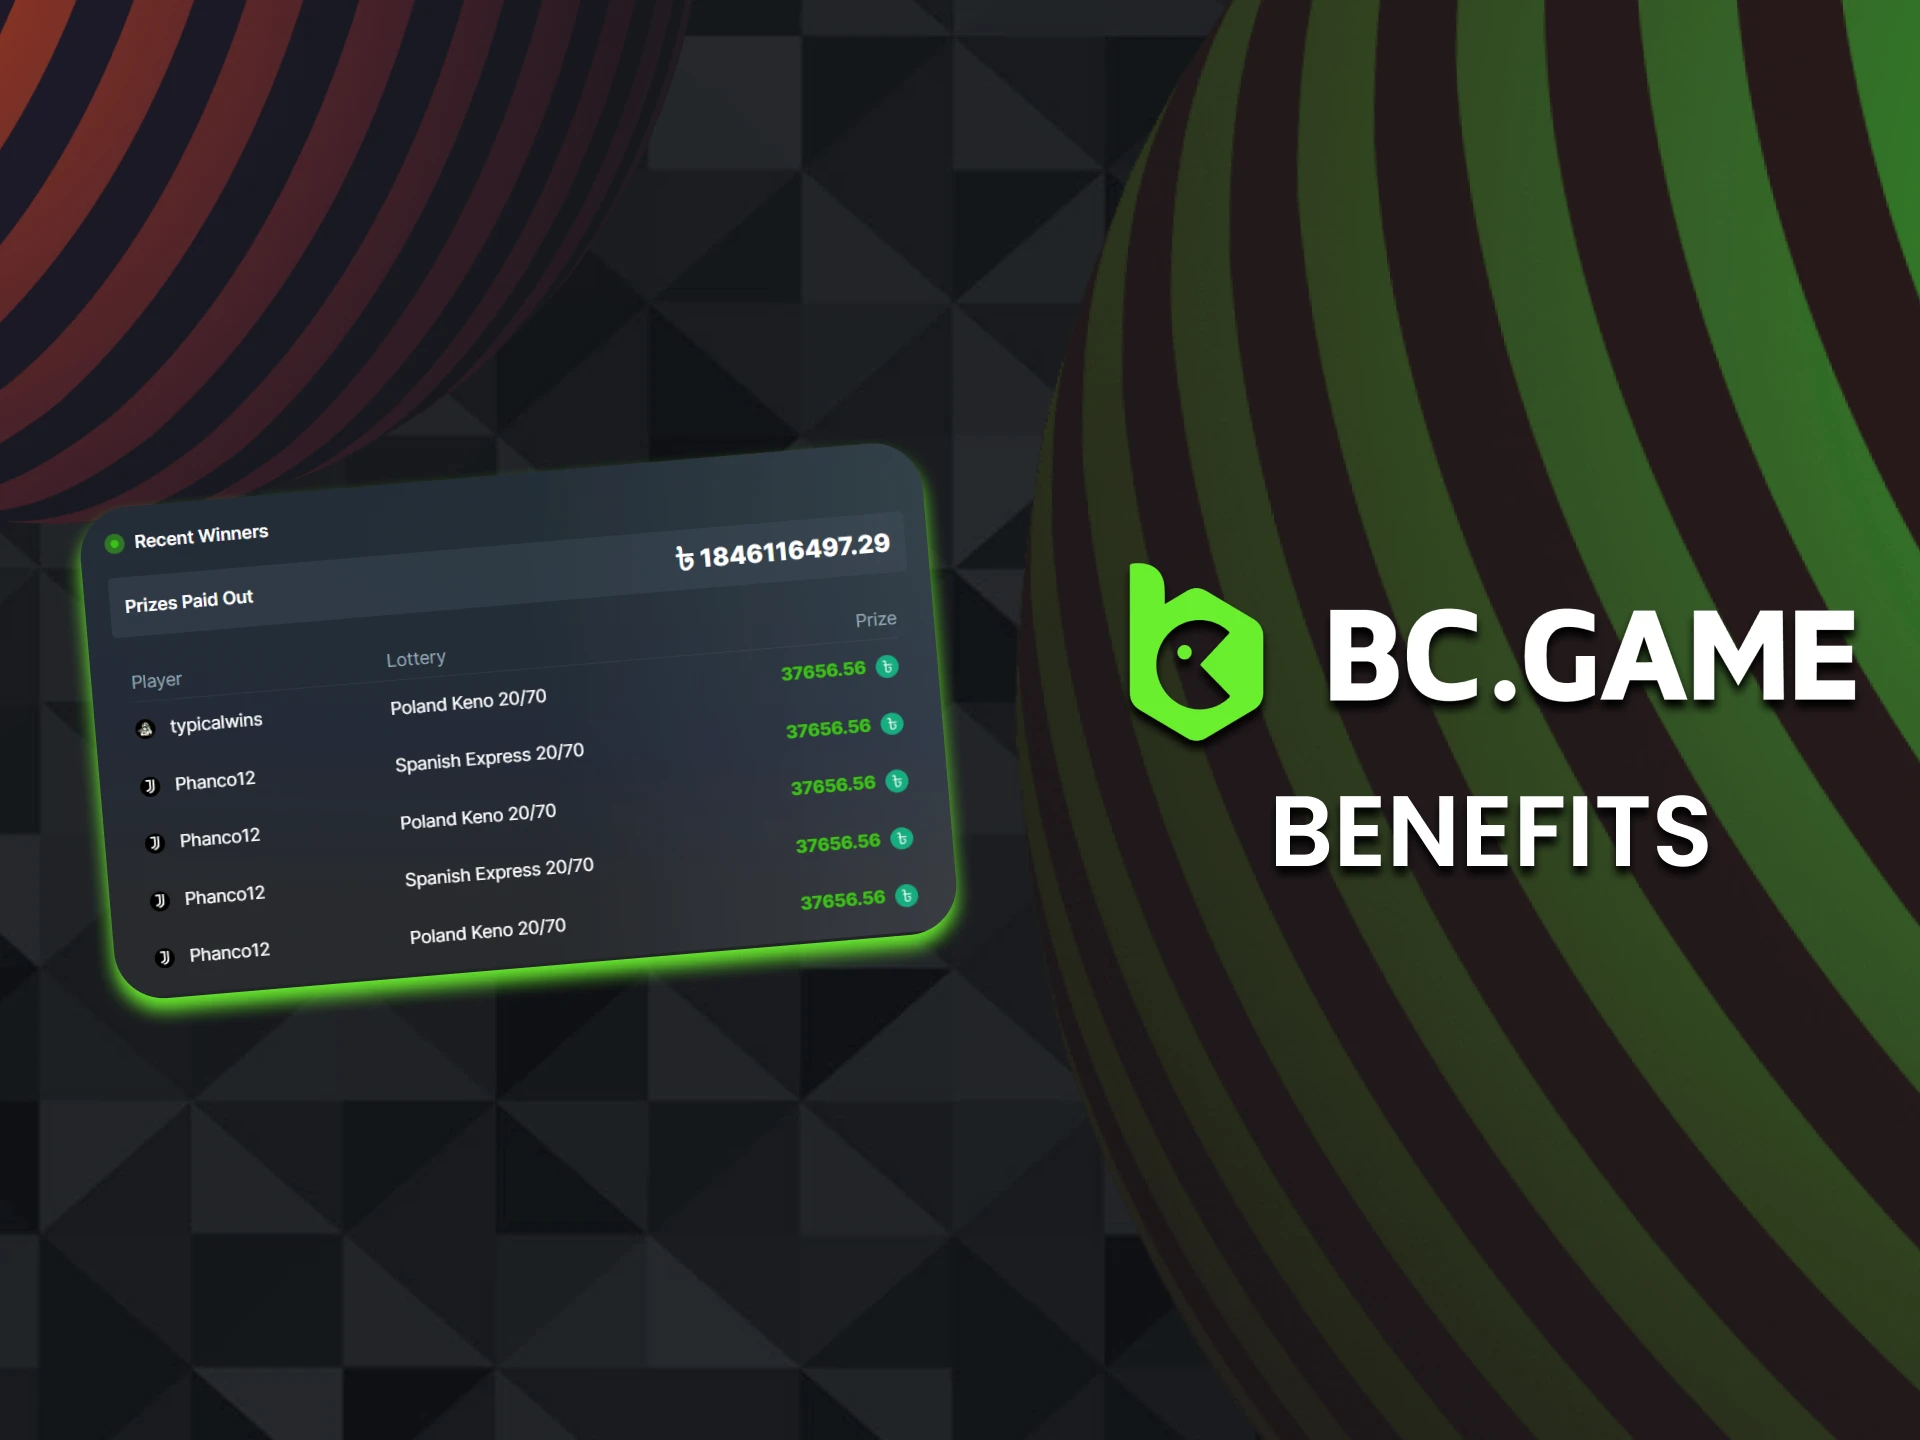 Find out the benefits of the BC Game lottery.